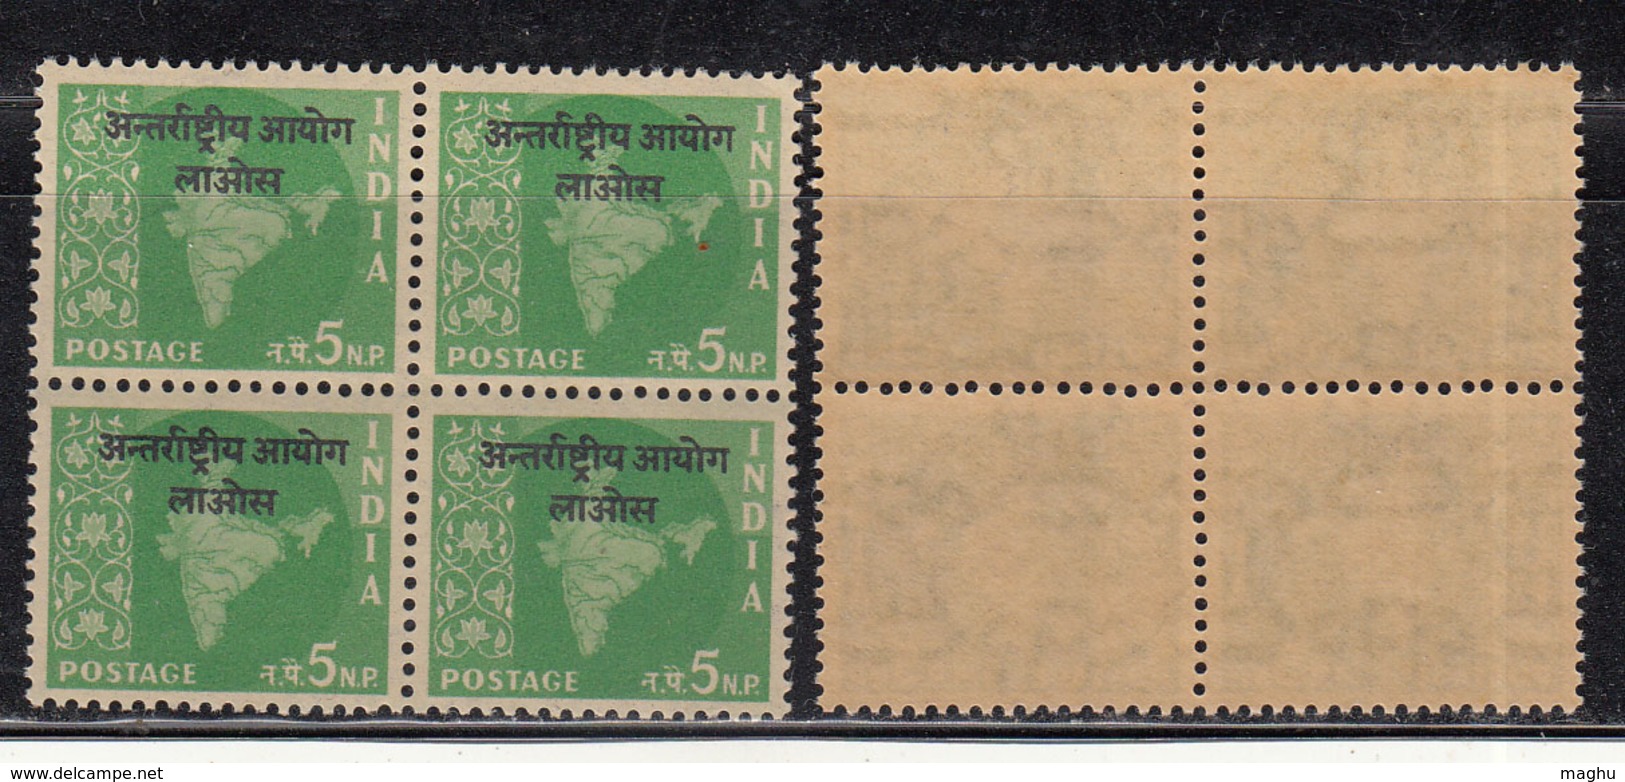 Block Of 4, 5np Ovpt Laos On Map Series,  India MNH 1962, Ashokan Watermark, - Franchise Militaire